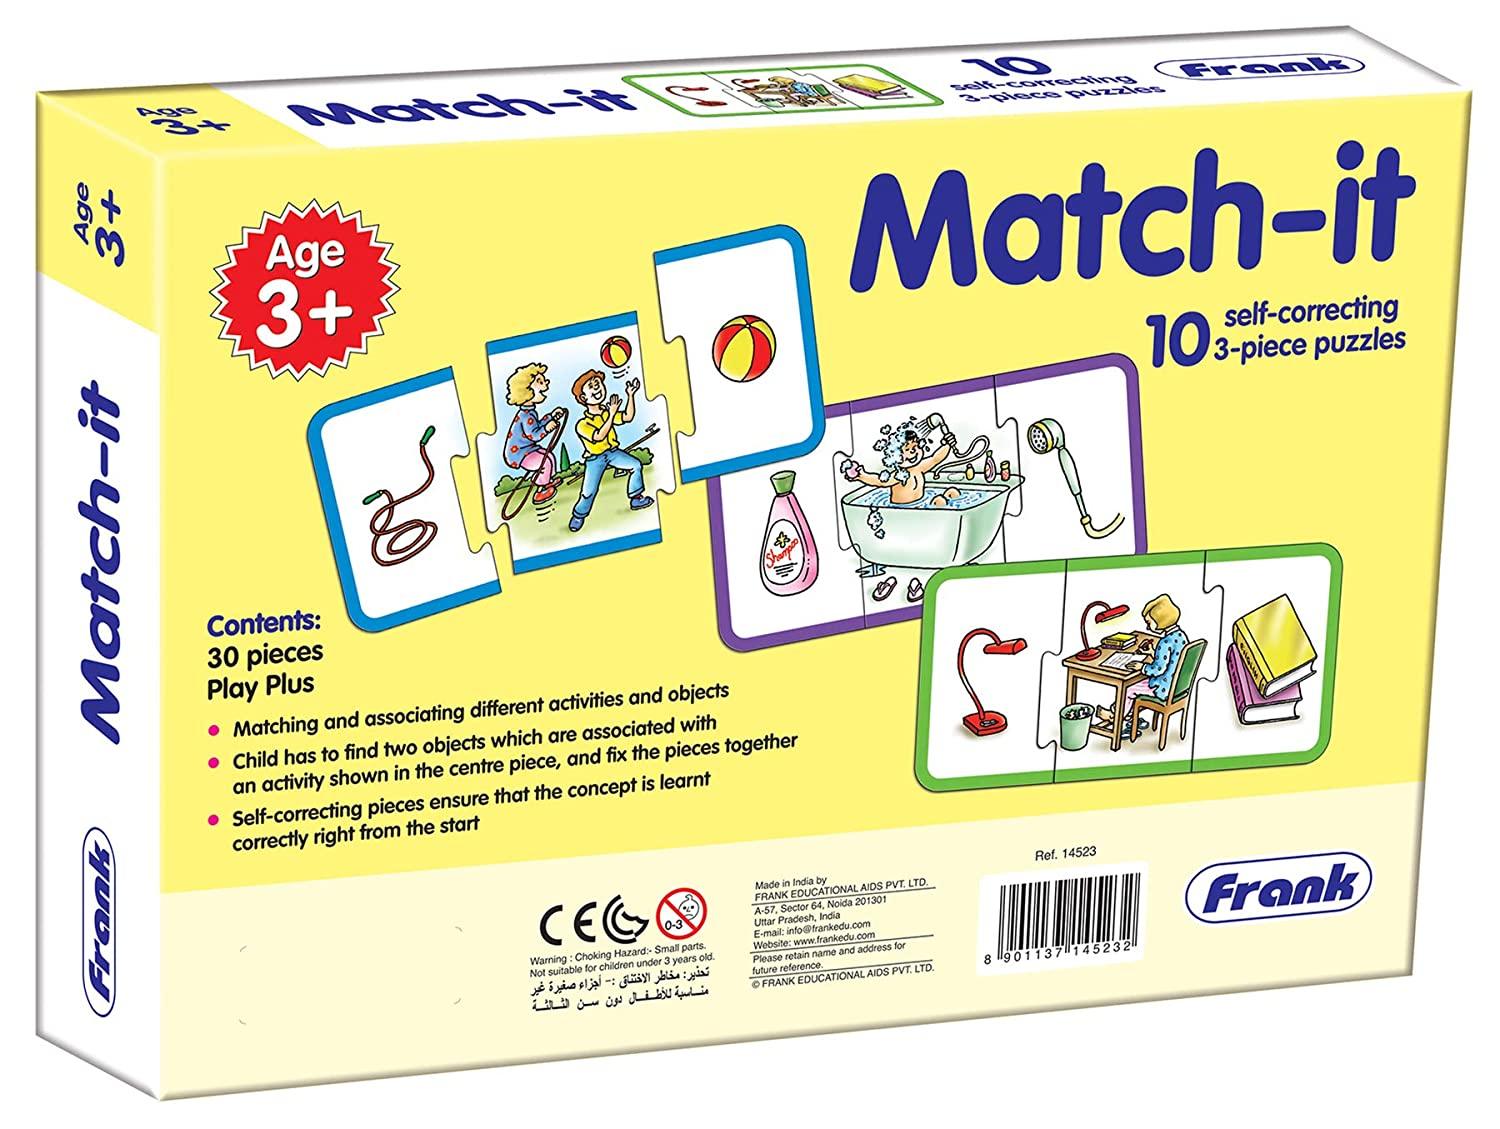 Frank Match-It - Early Learner 10 Self-correcting 3-Piece Puzzles